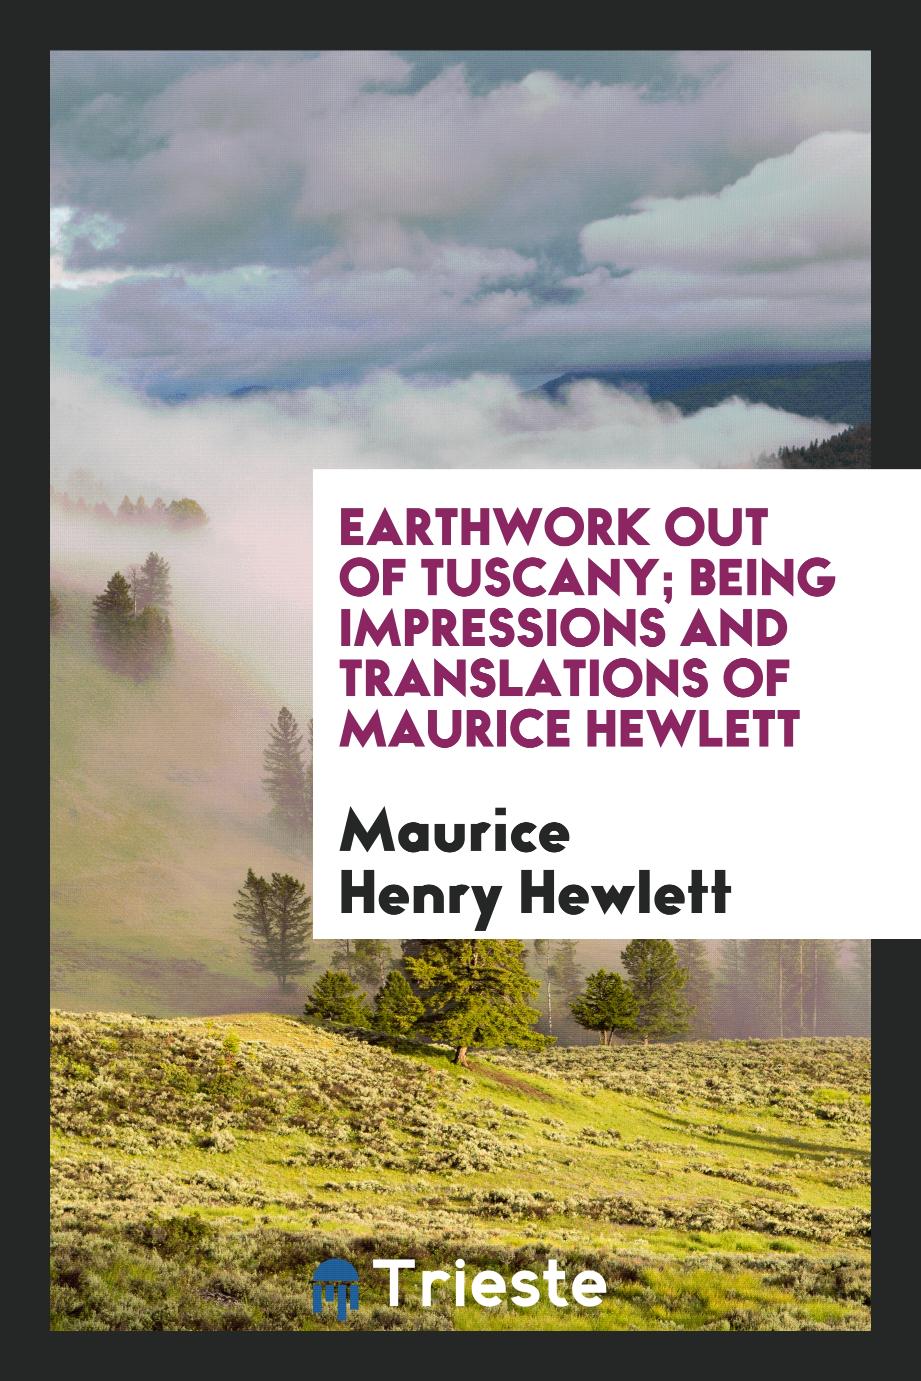 Earthwork out of Tuscany; being impressions and translations of Maurice Hewlett